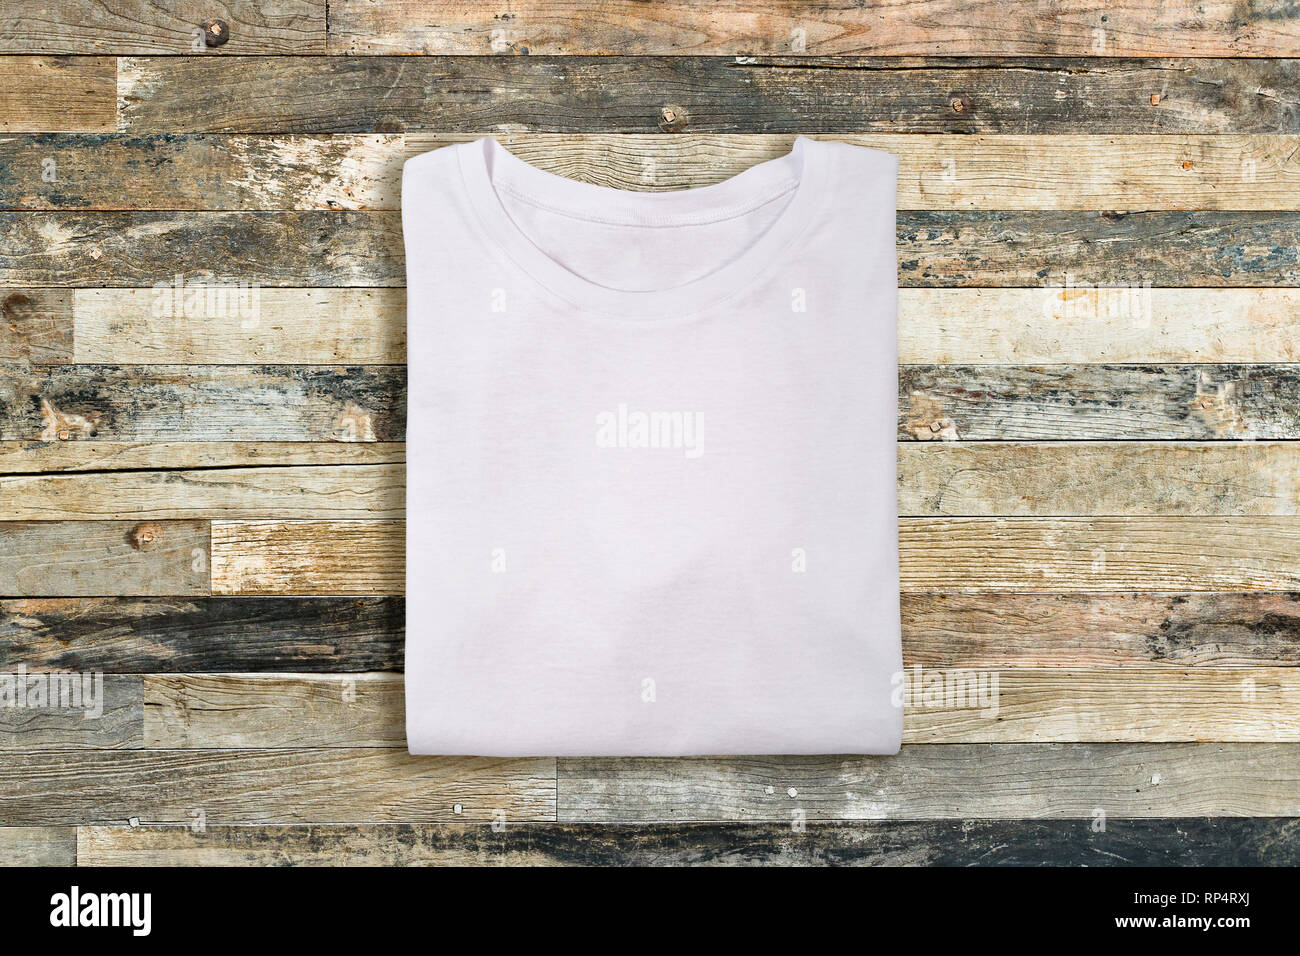 Download Blank White Folded T Shirt On Wooden Background Stock Photo Alamy